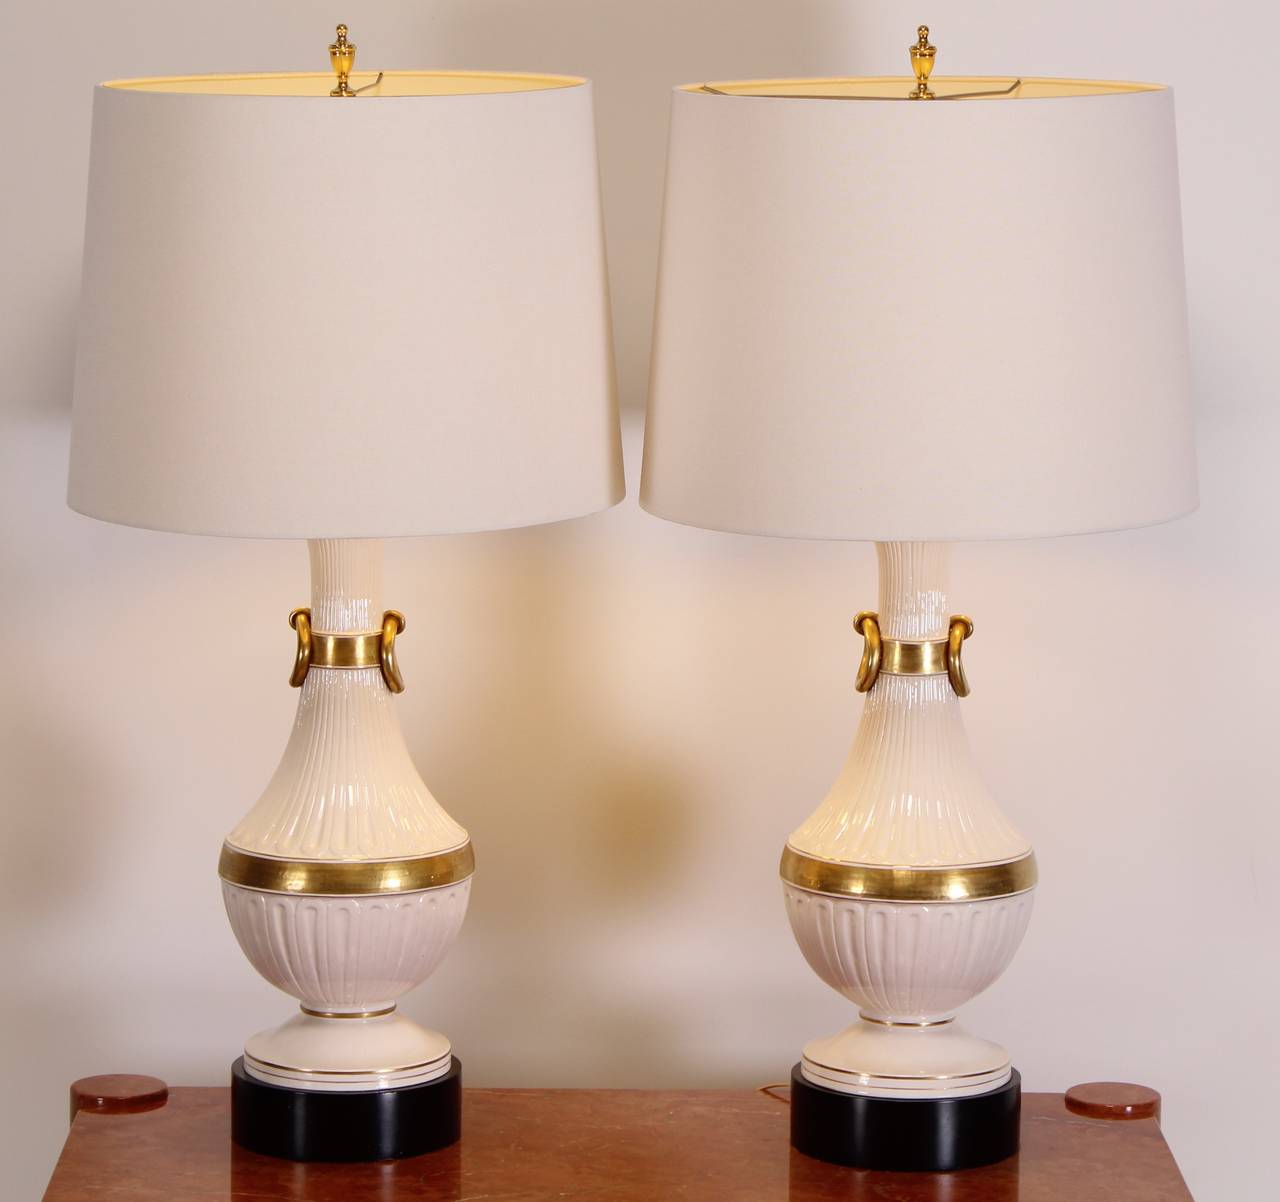 A great pair of Hollywood Regency Classical Italian Pottery Lamps in the style of Chapman. White pottery with gold gilt Accents. Comes with linen shades if desired. Entire Height to top of finial is 44